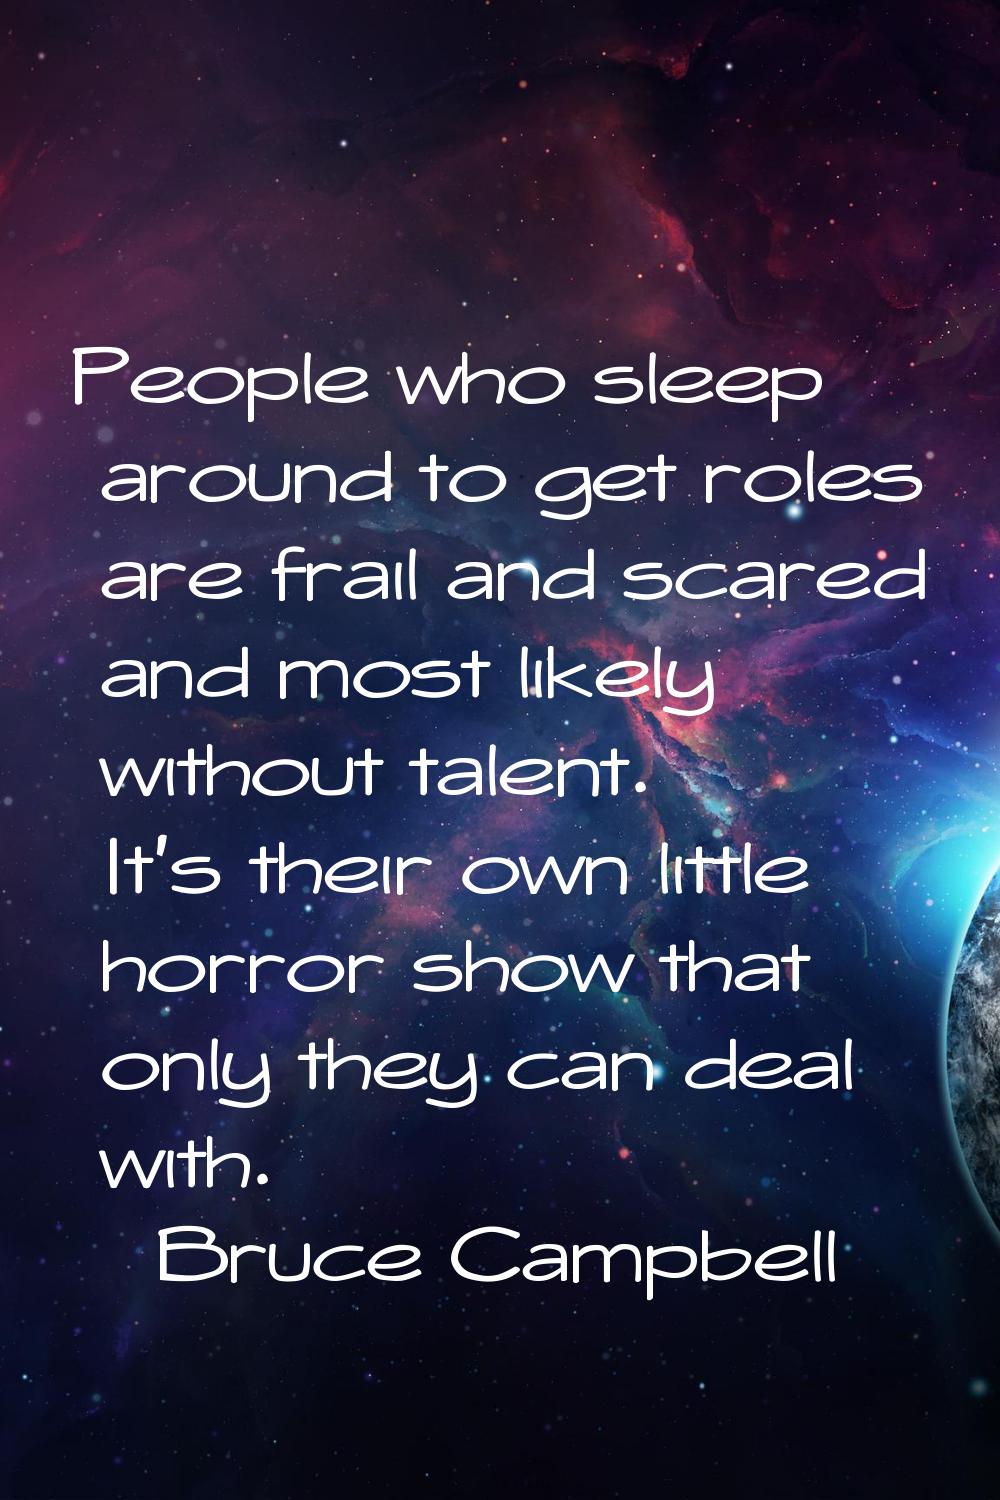 People who sleep around to get roles are frail and scared and most likely without talent. It's thei